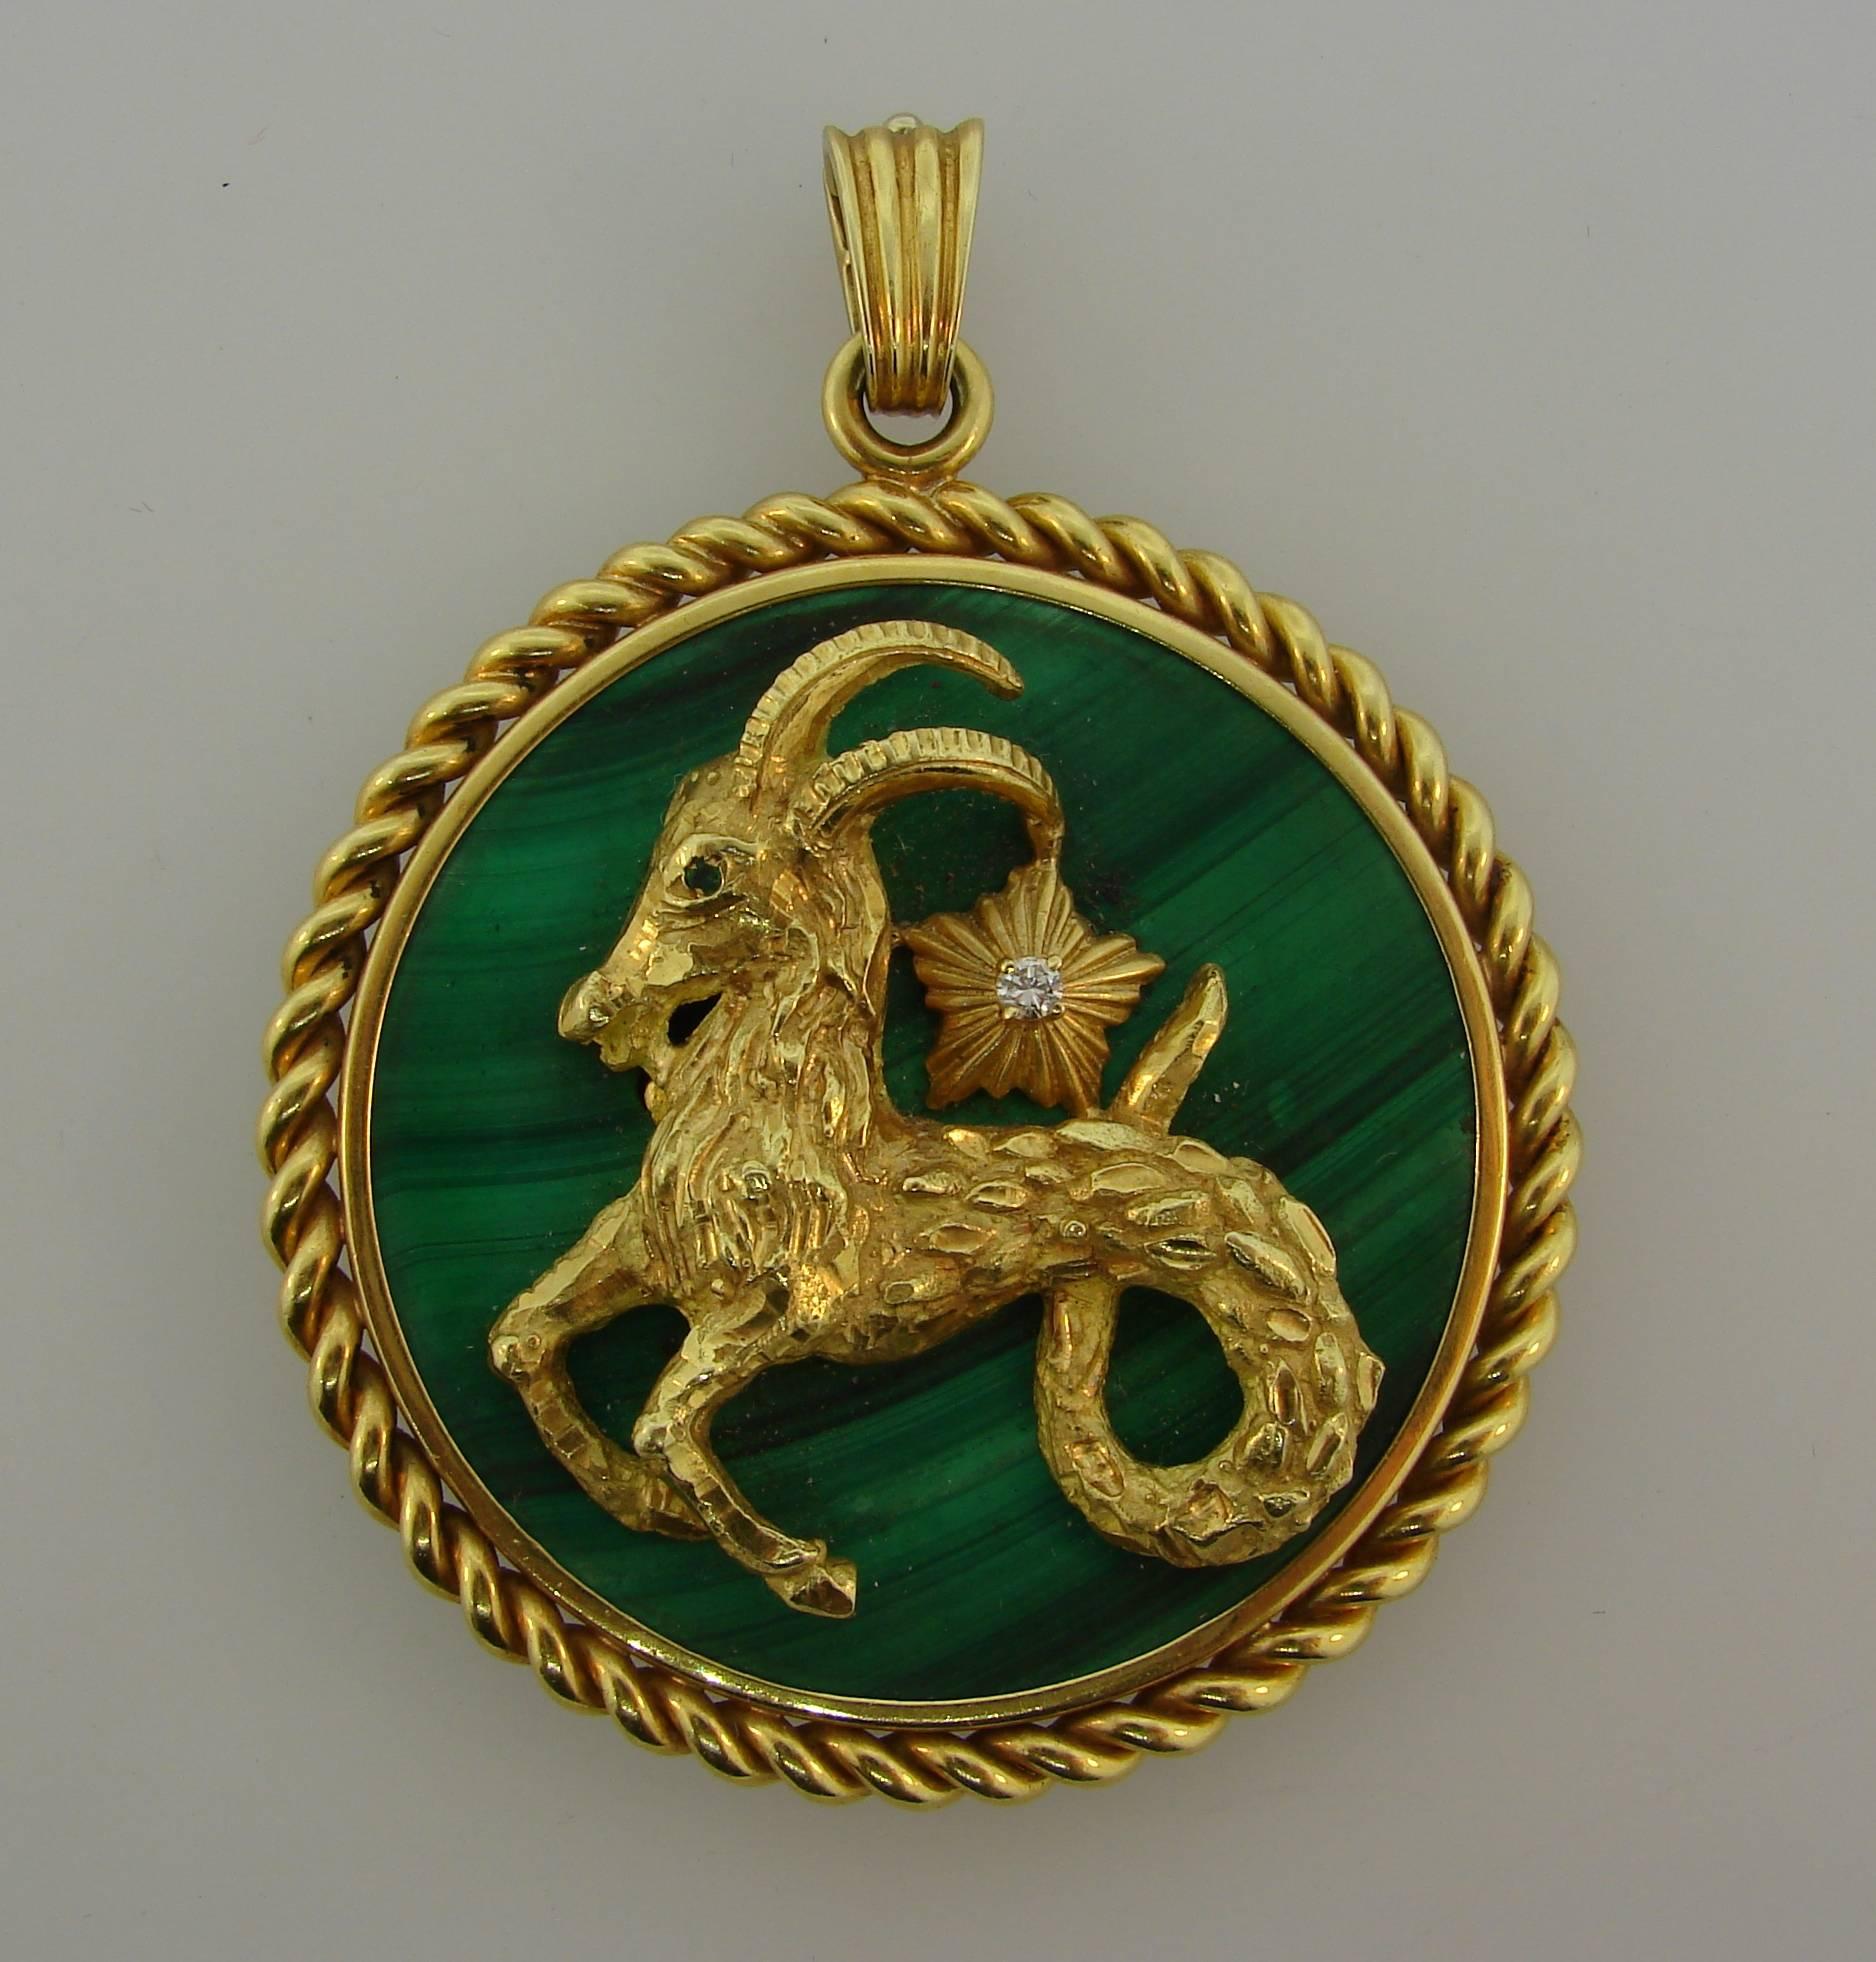 Colorful and bold Capricorn pendant created by Van Cleef & Arpels in Italy in the 1970's. A great gift for someone who was born between December 22 and January 20. 
It is made of 18 karat (stamped) yellow gold and malachite and accented with a